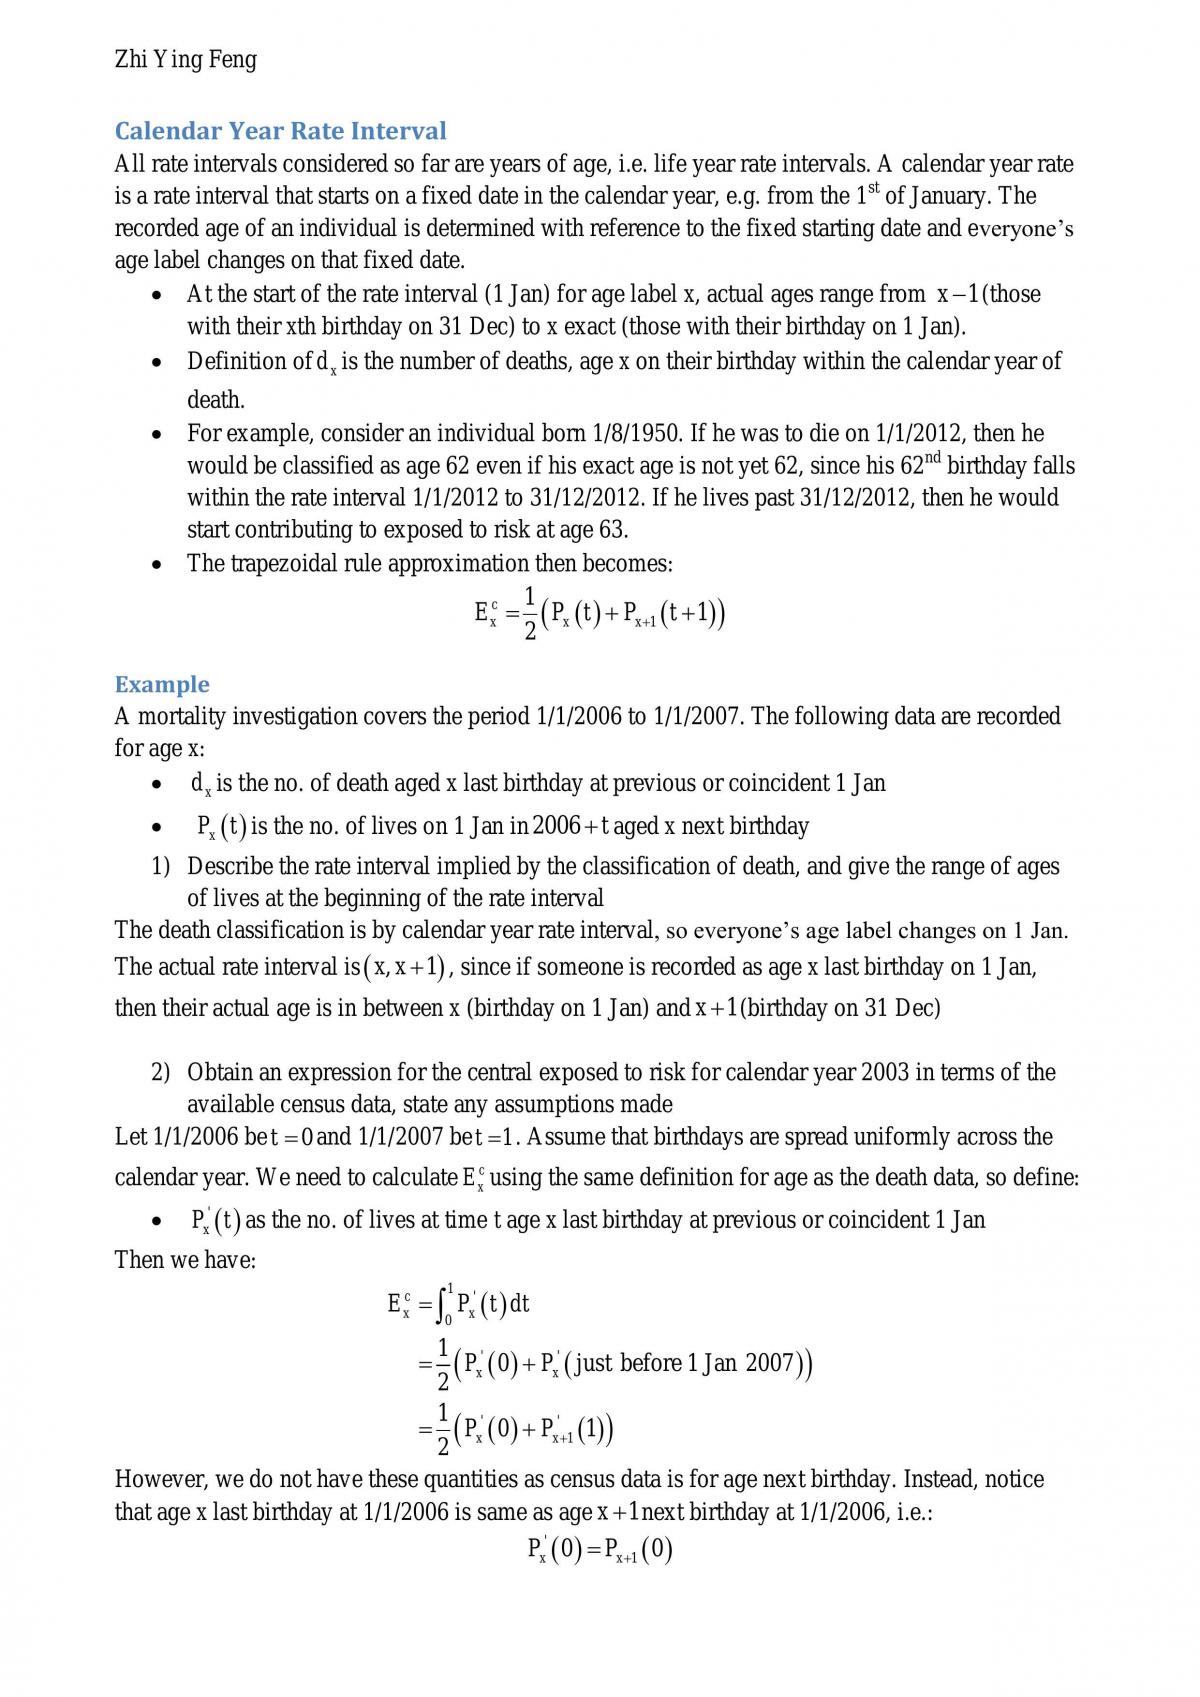 Full Course Notes - Page 39